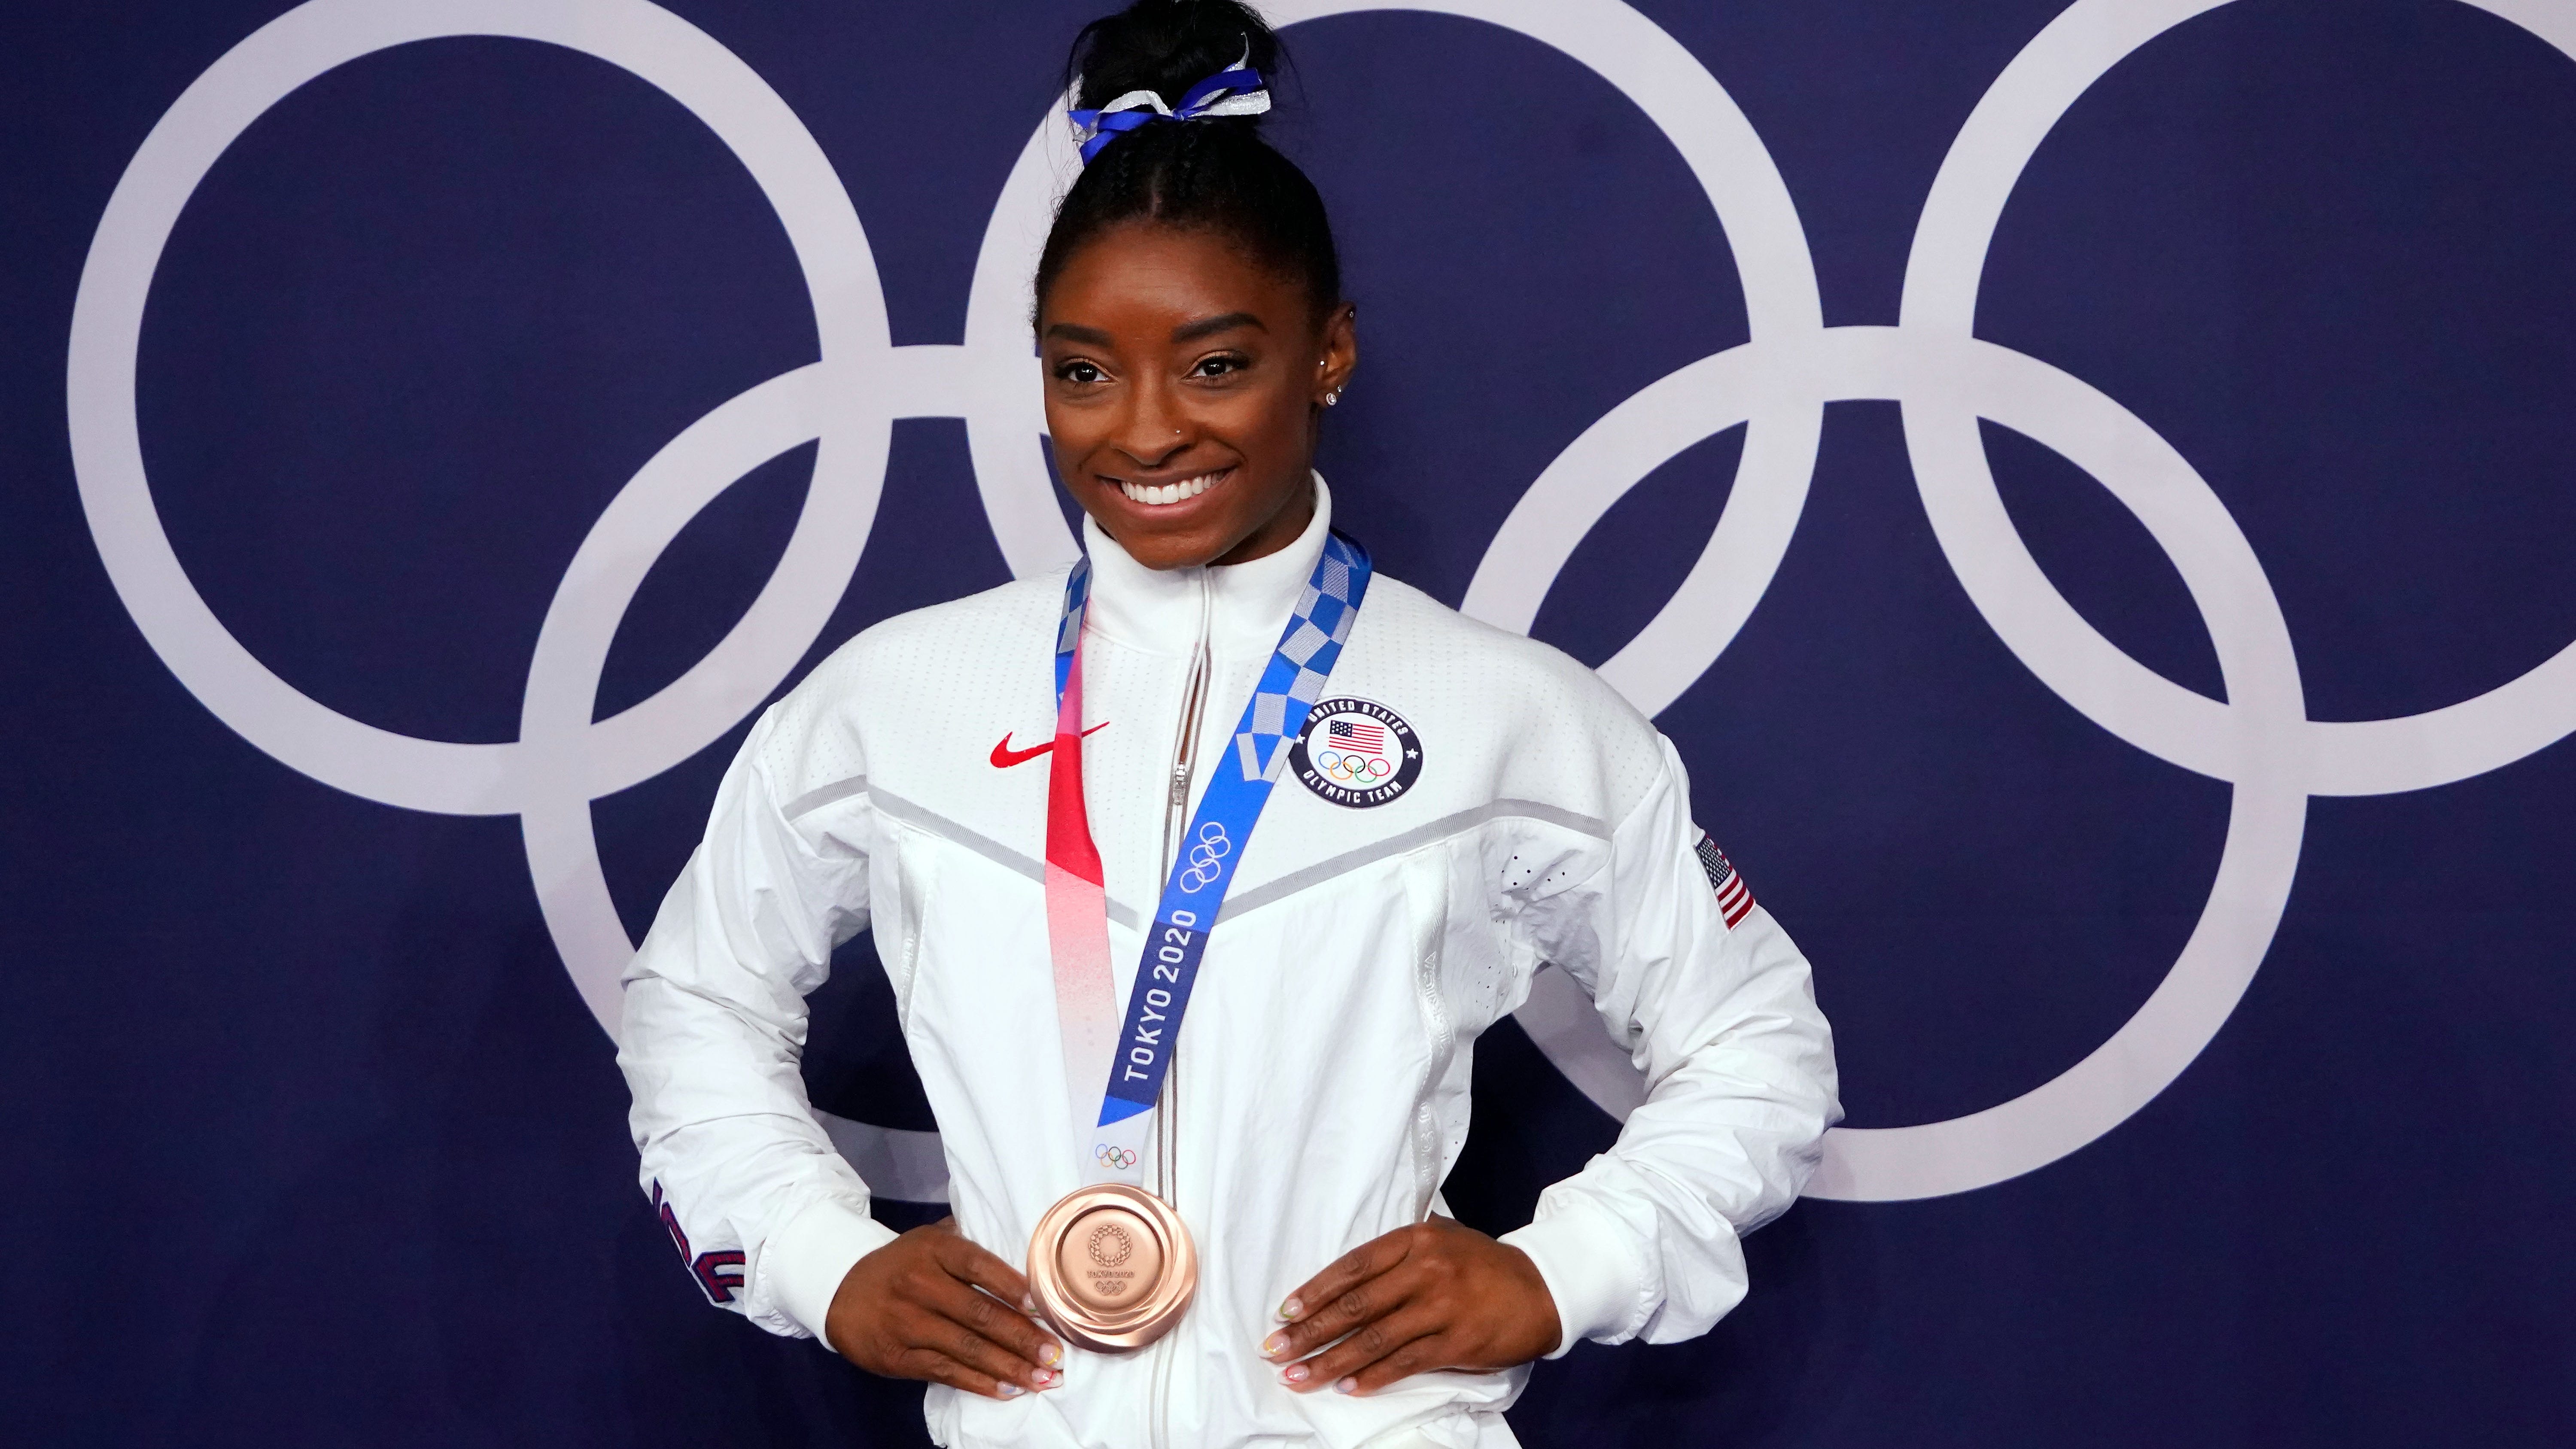 Simone Biles poses for photographs after winning the bronze medal on beam during the Tokyo 2020 Olympic Summer Games at Ariake Gymnastics Centre.